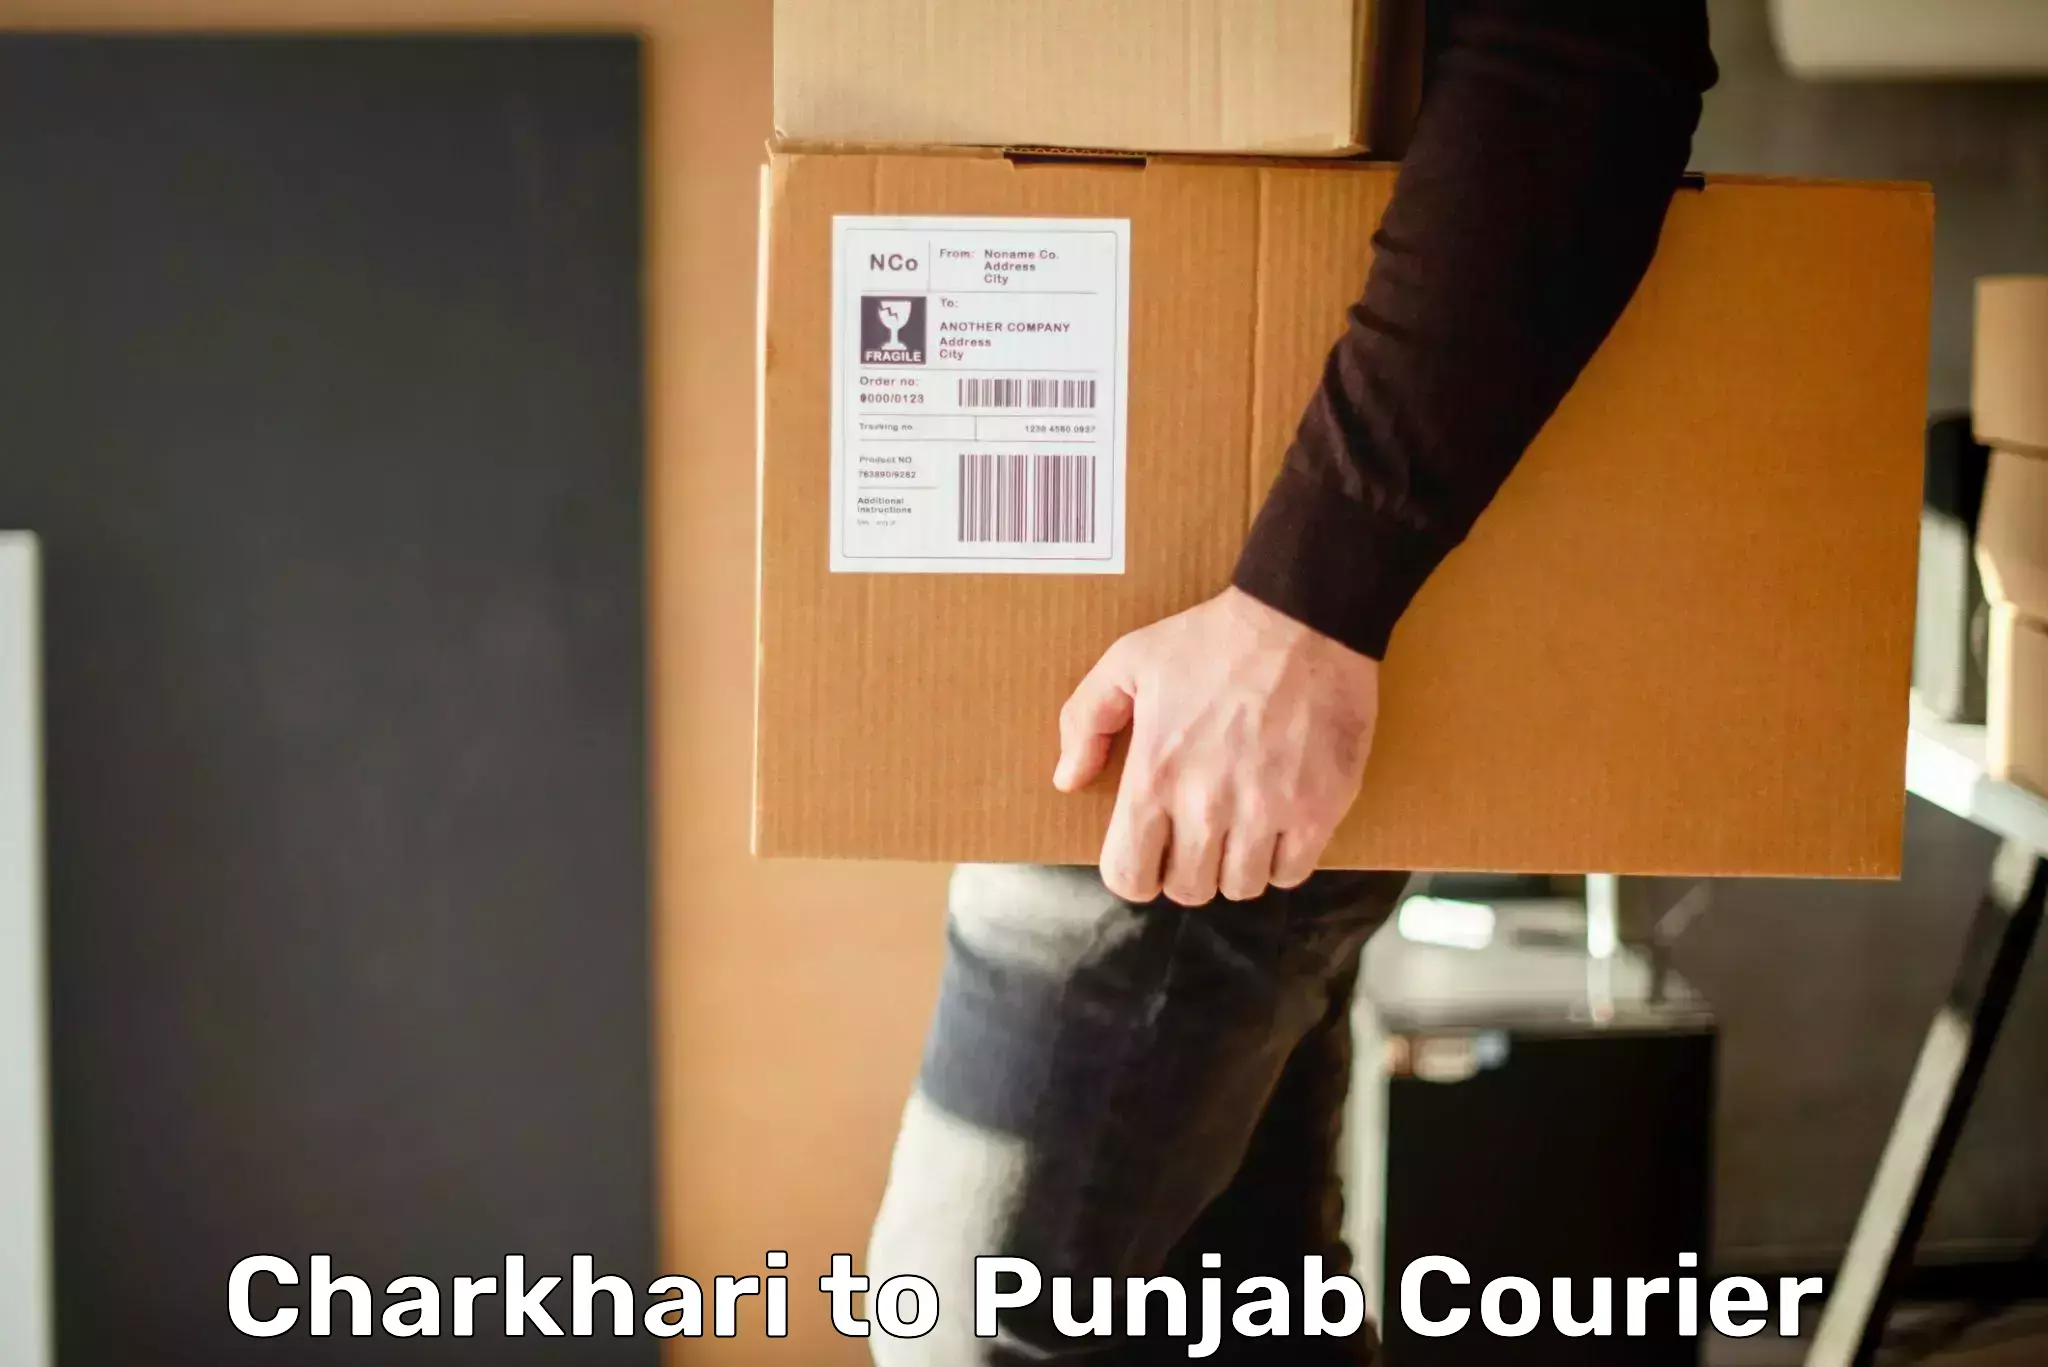 Courier service booking Charkhari to Mohali